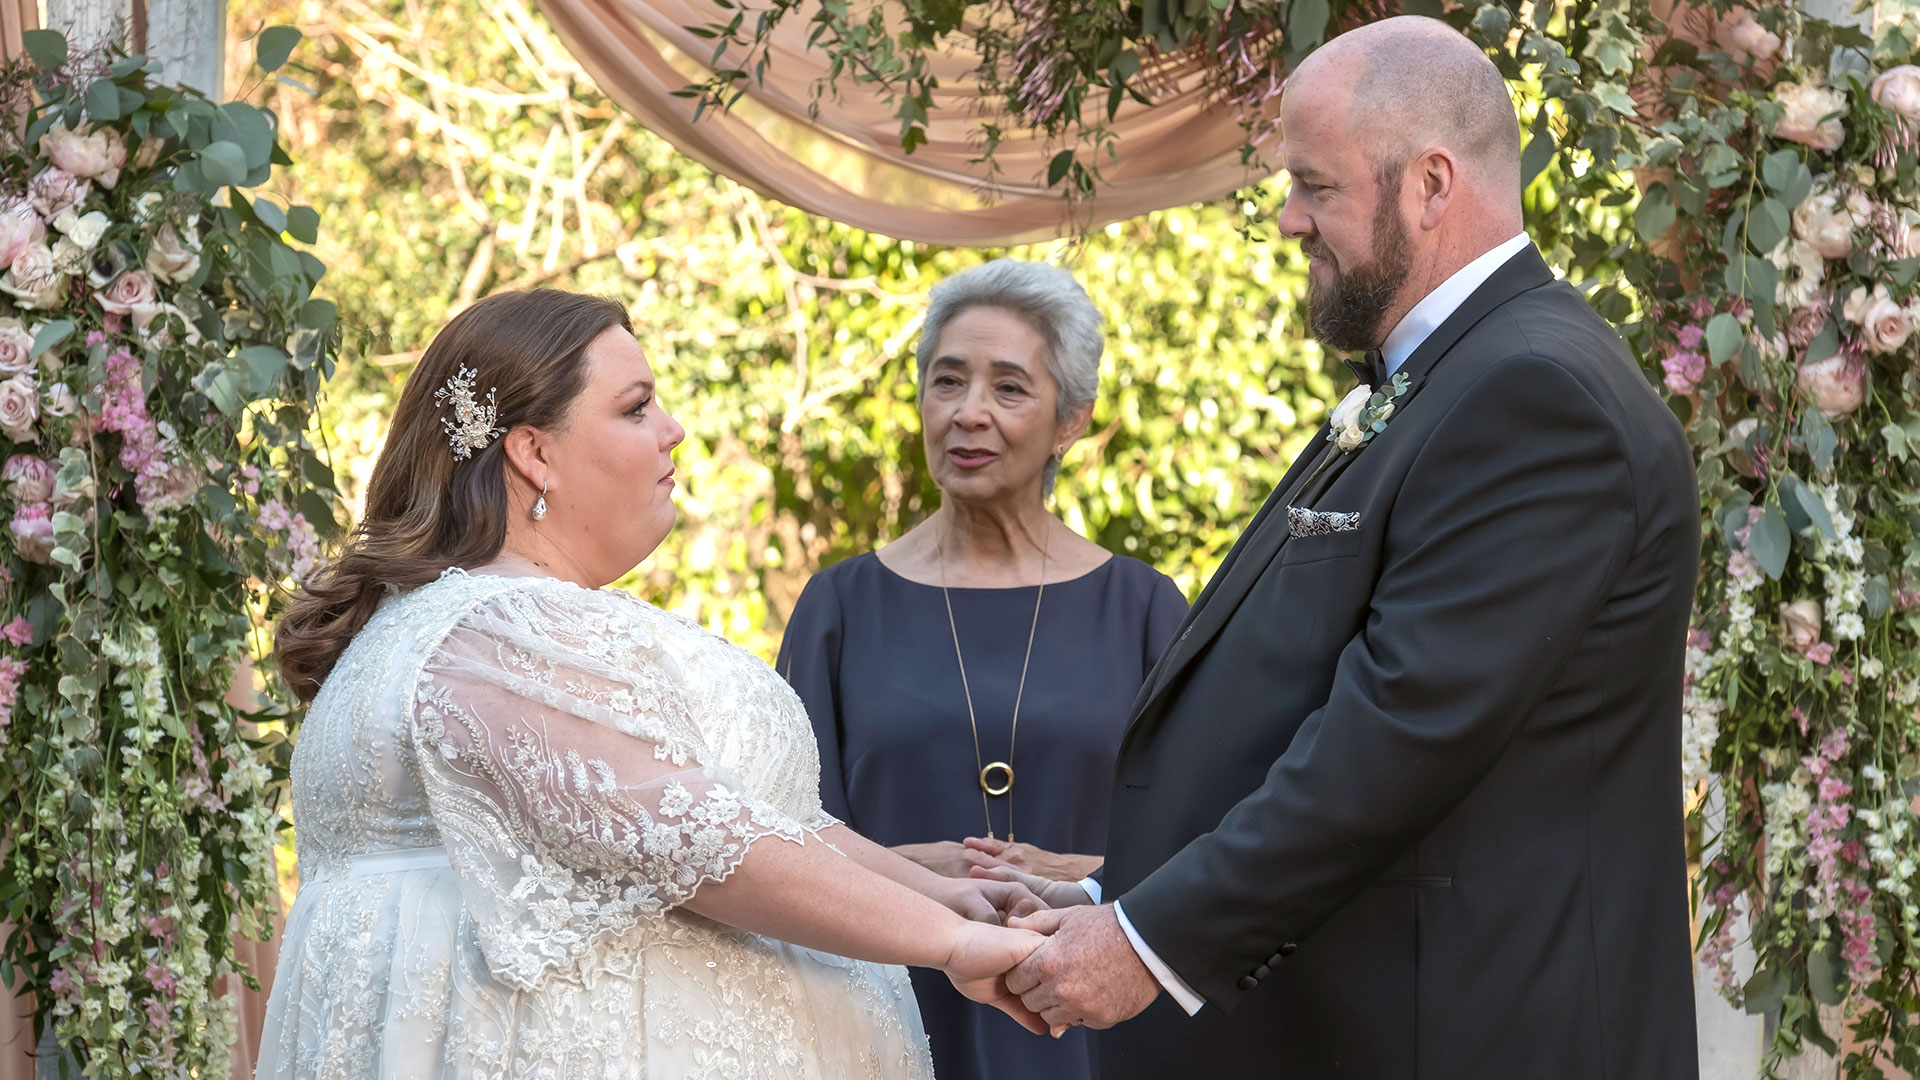 Watch This Is Us Episode: The Wedding - NBC.com